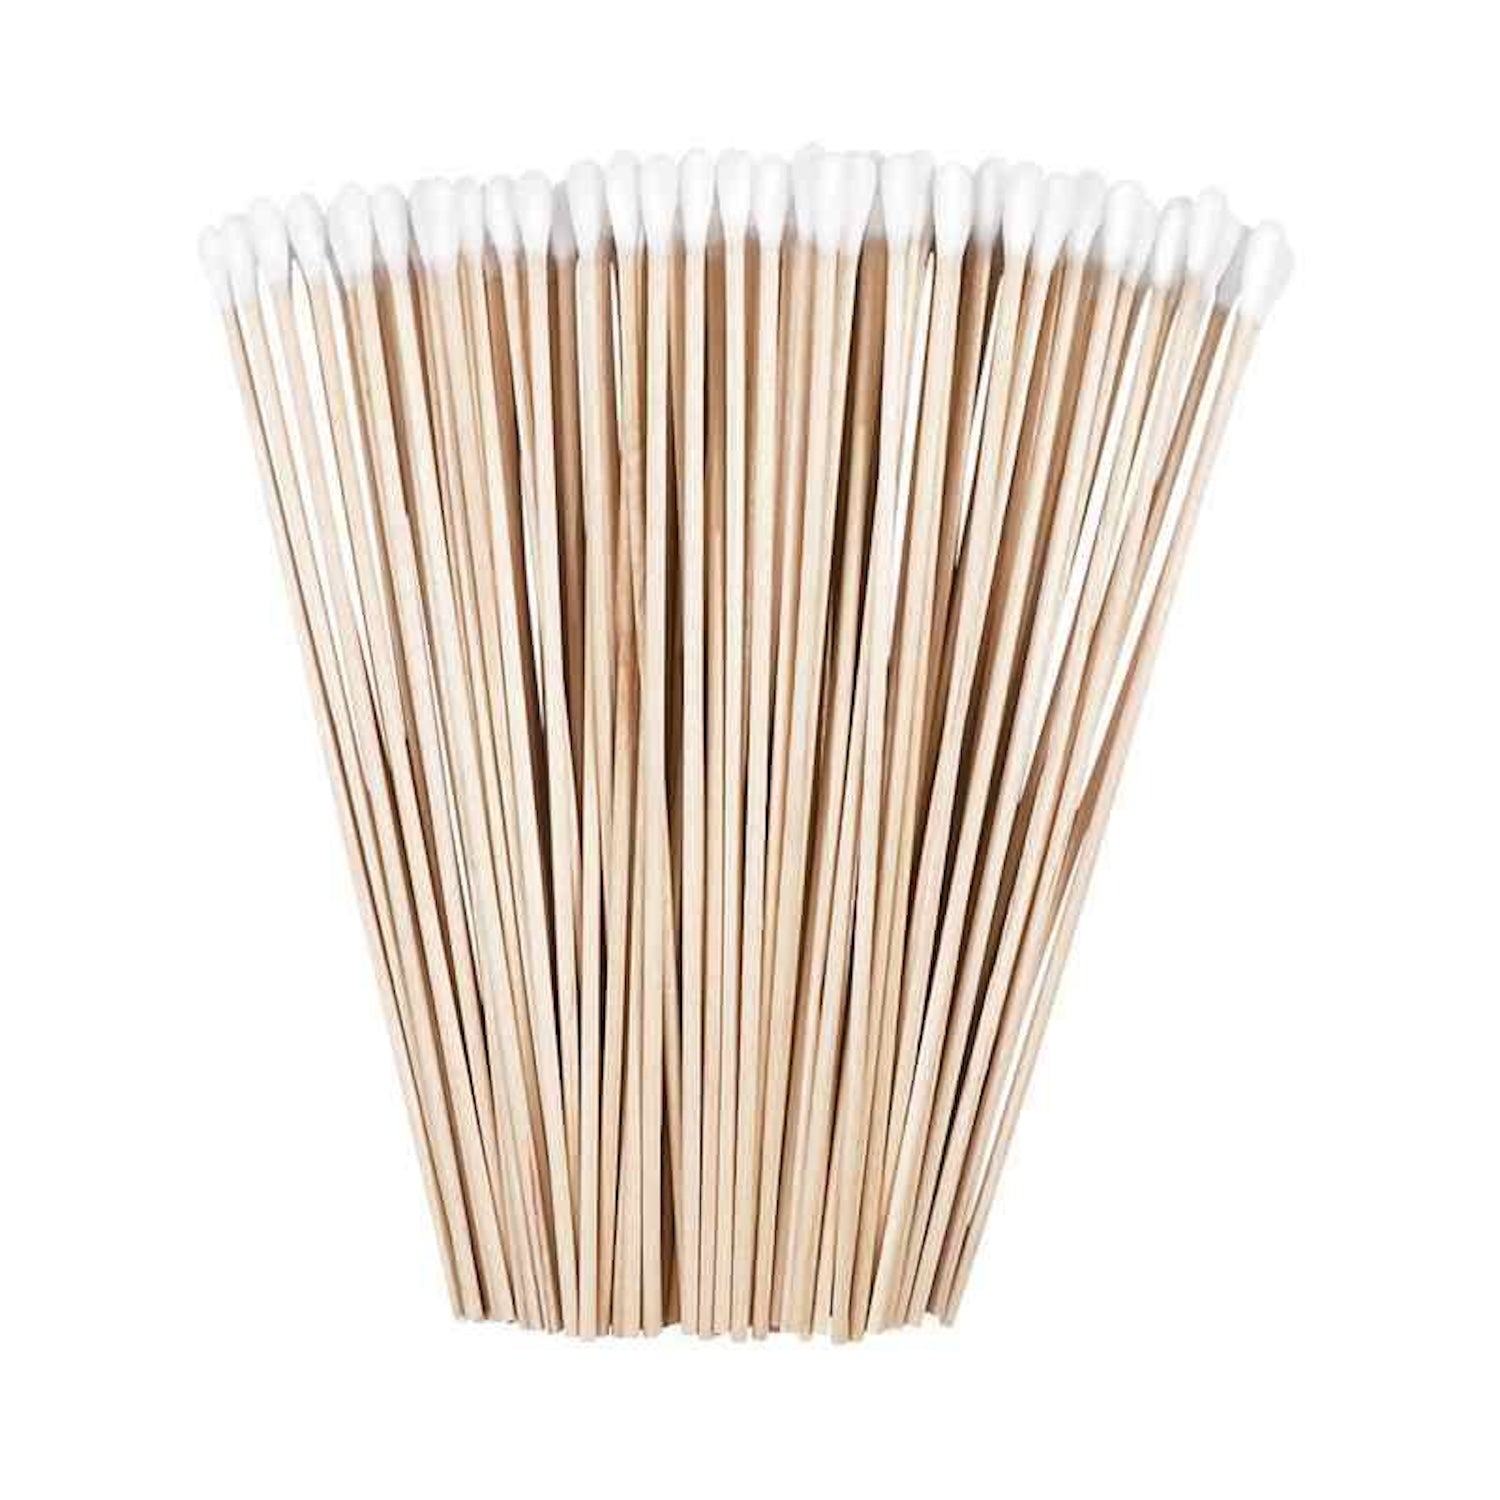 Cotton Applicators | Small Tipped | 15cm | Sterile | Pack of 500 (5 x 100)